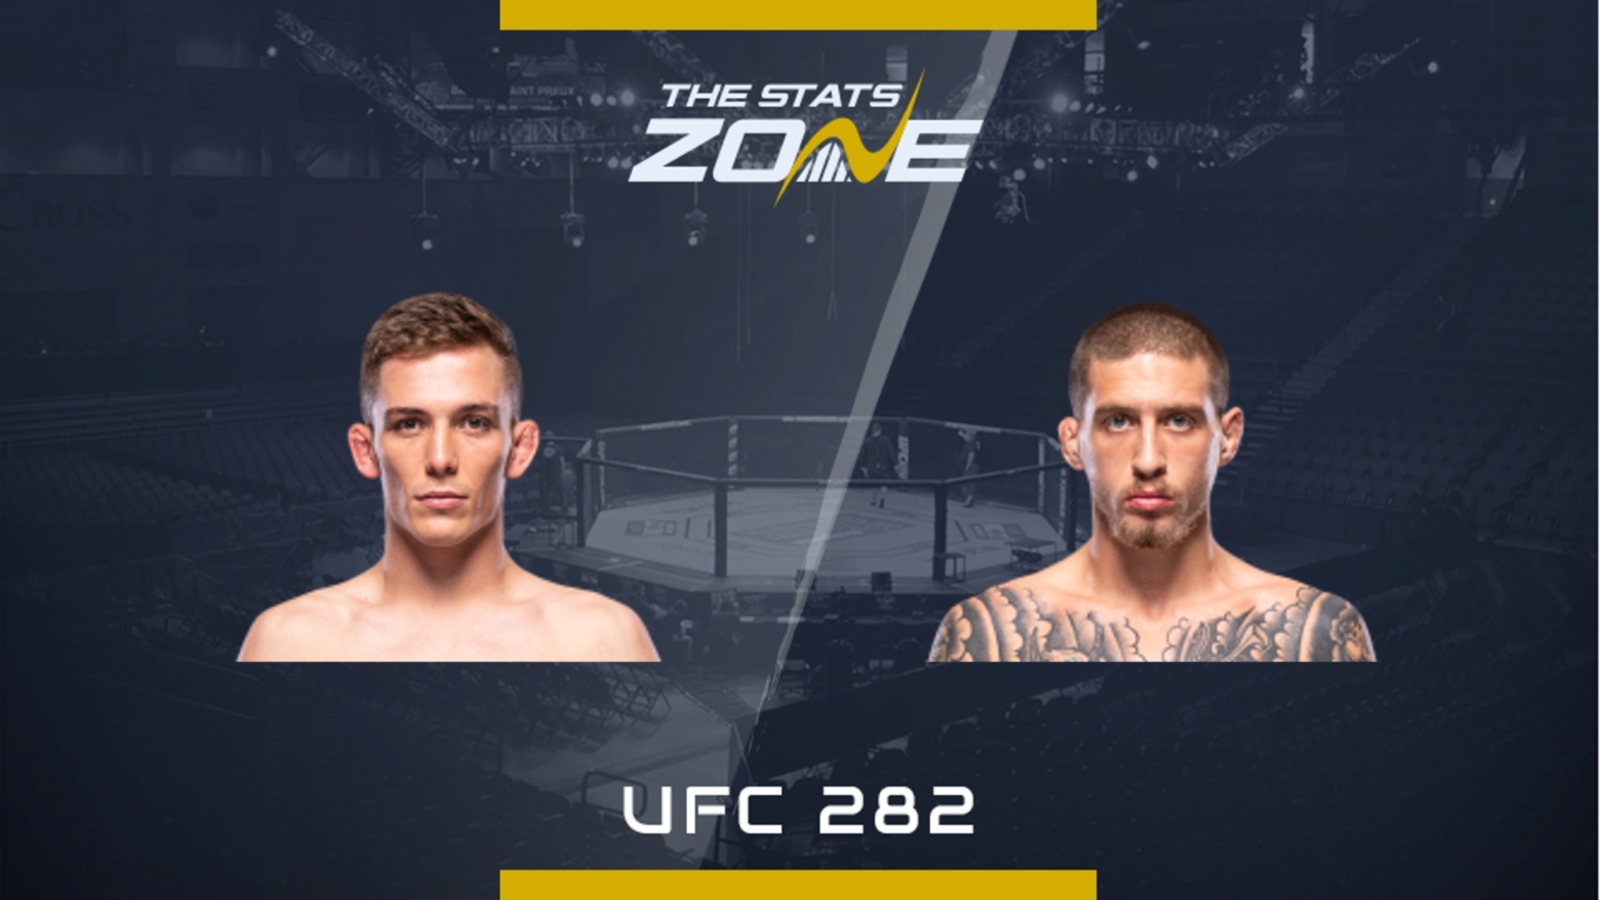 MMA Preview Cameron Saaiman vs Steven Koslow at UFC 282 The Stats Zone